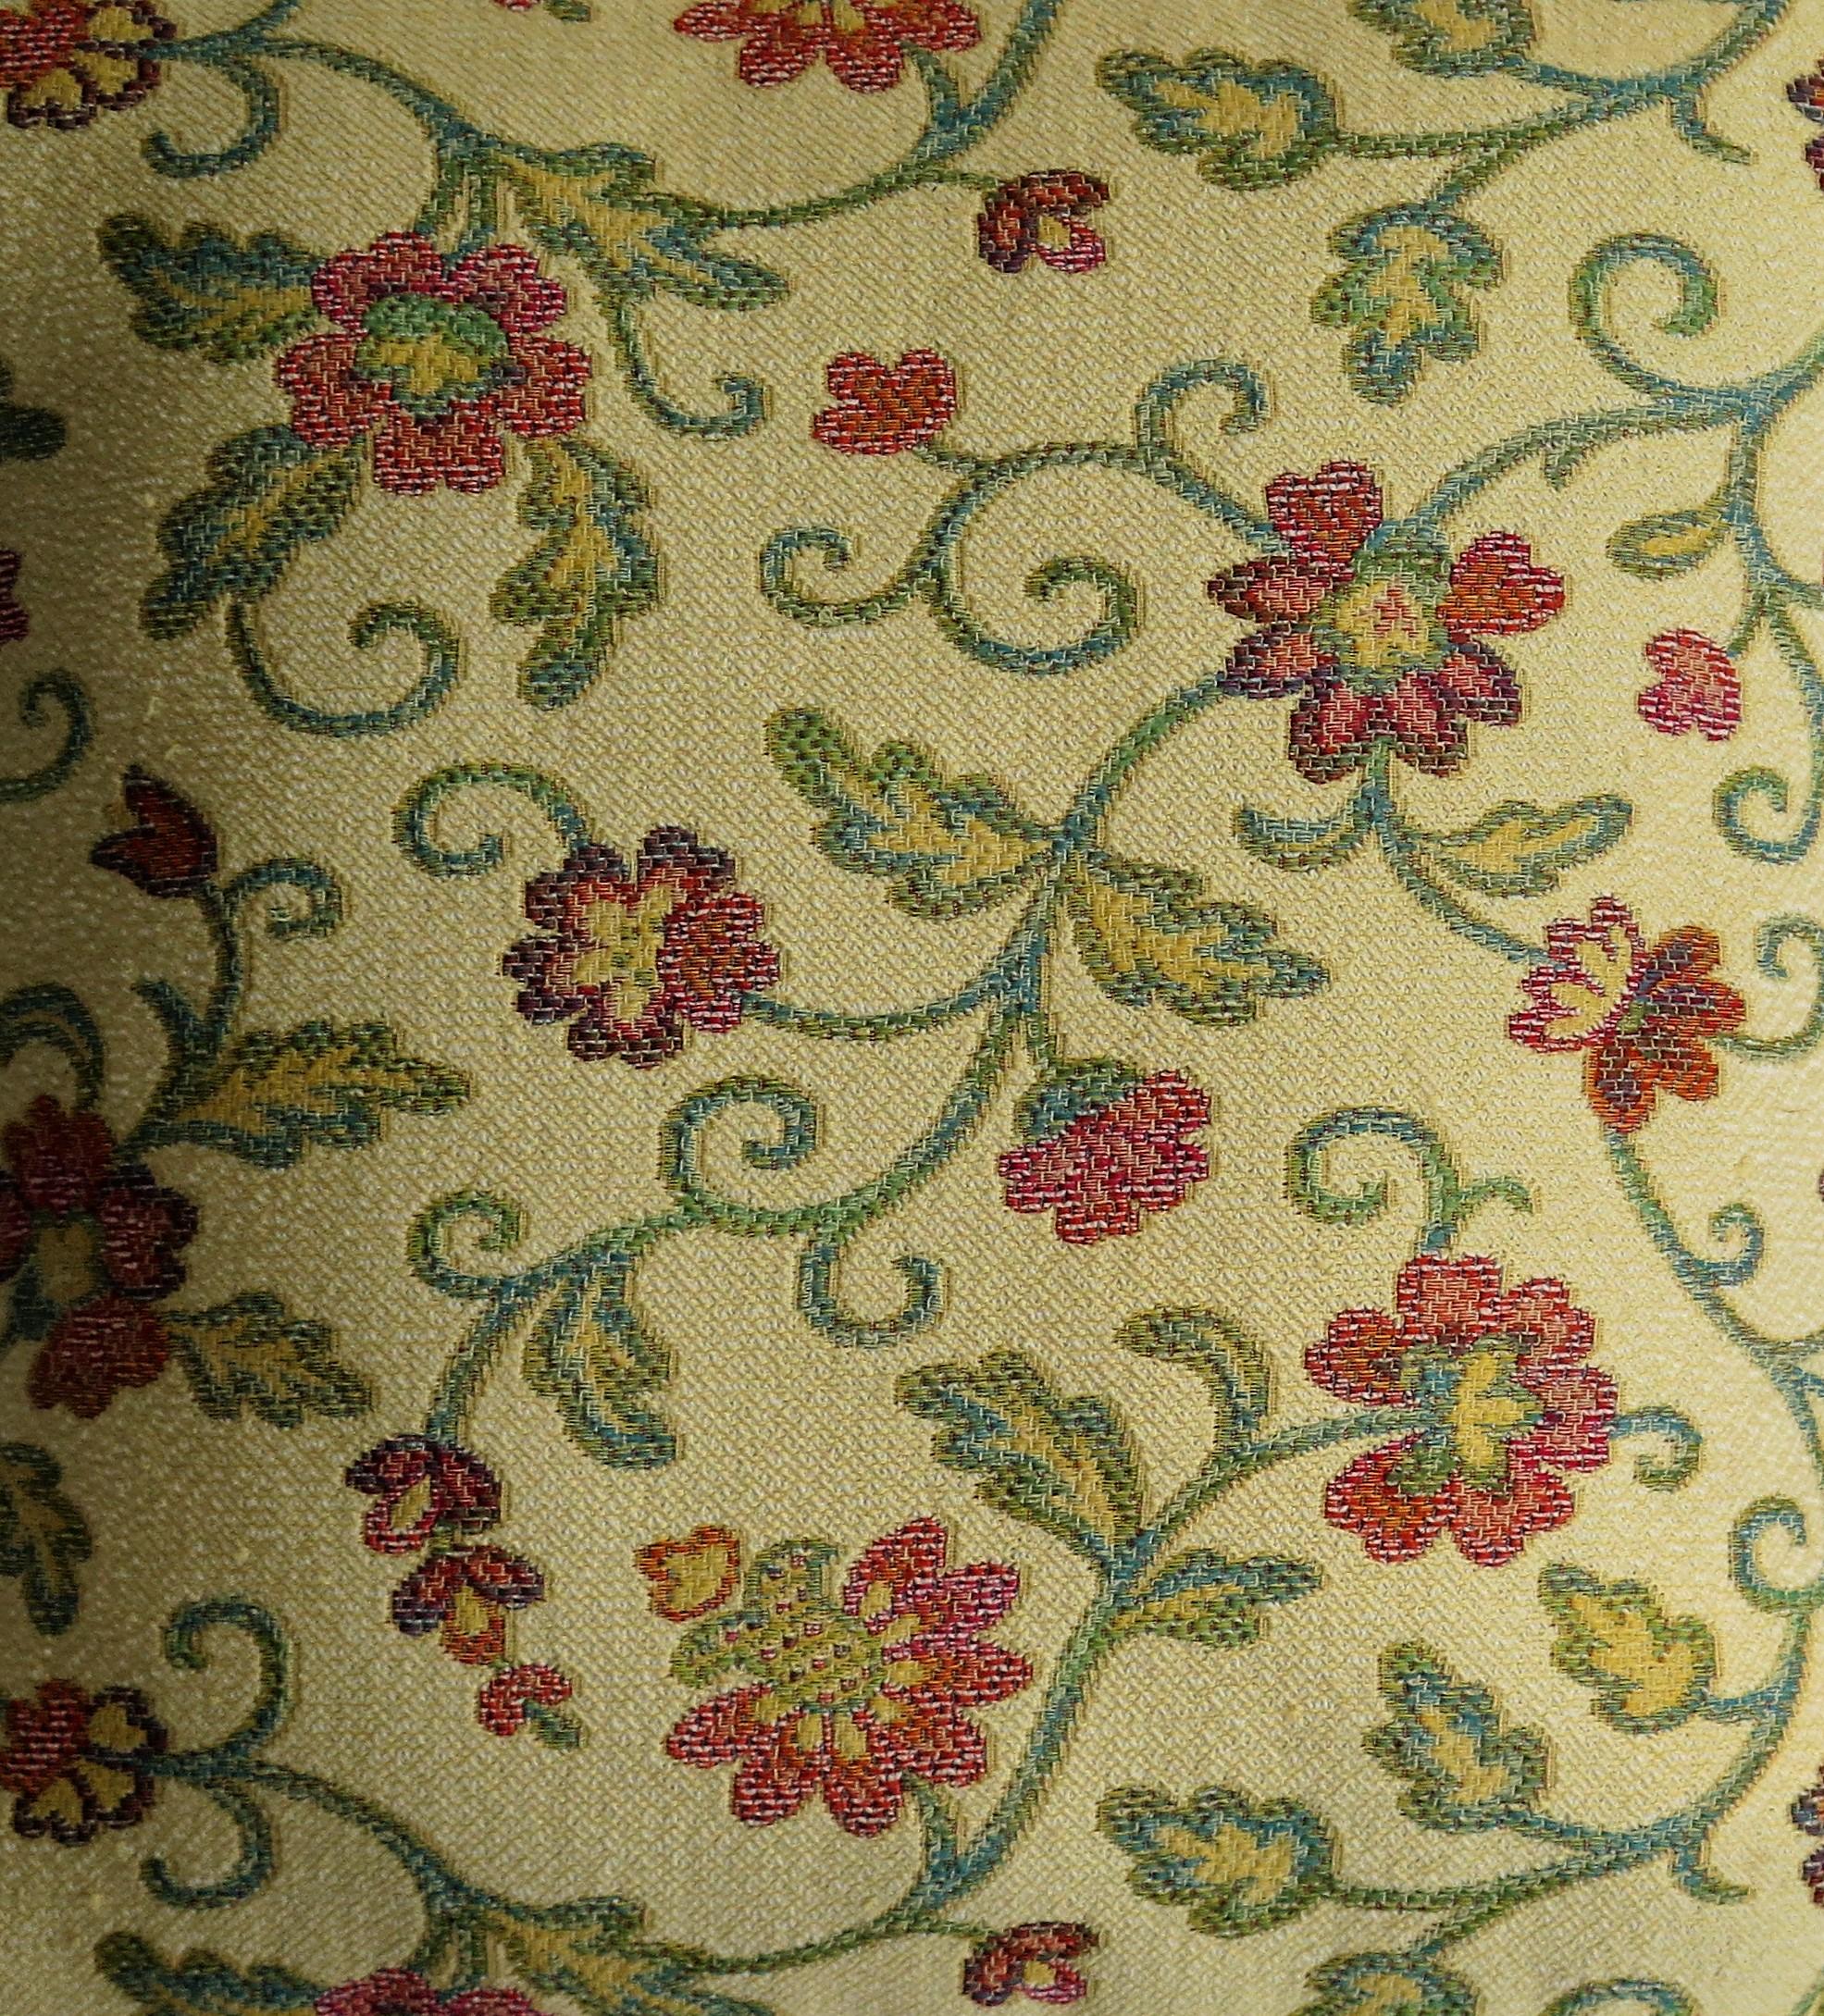 Fabric Woven Cushion or Pillow in Art Nouveau Floral Vine Style, 20th Century For Sale